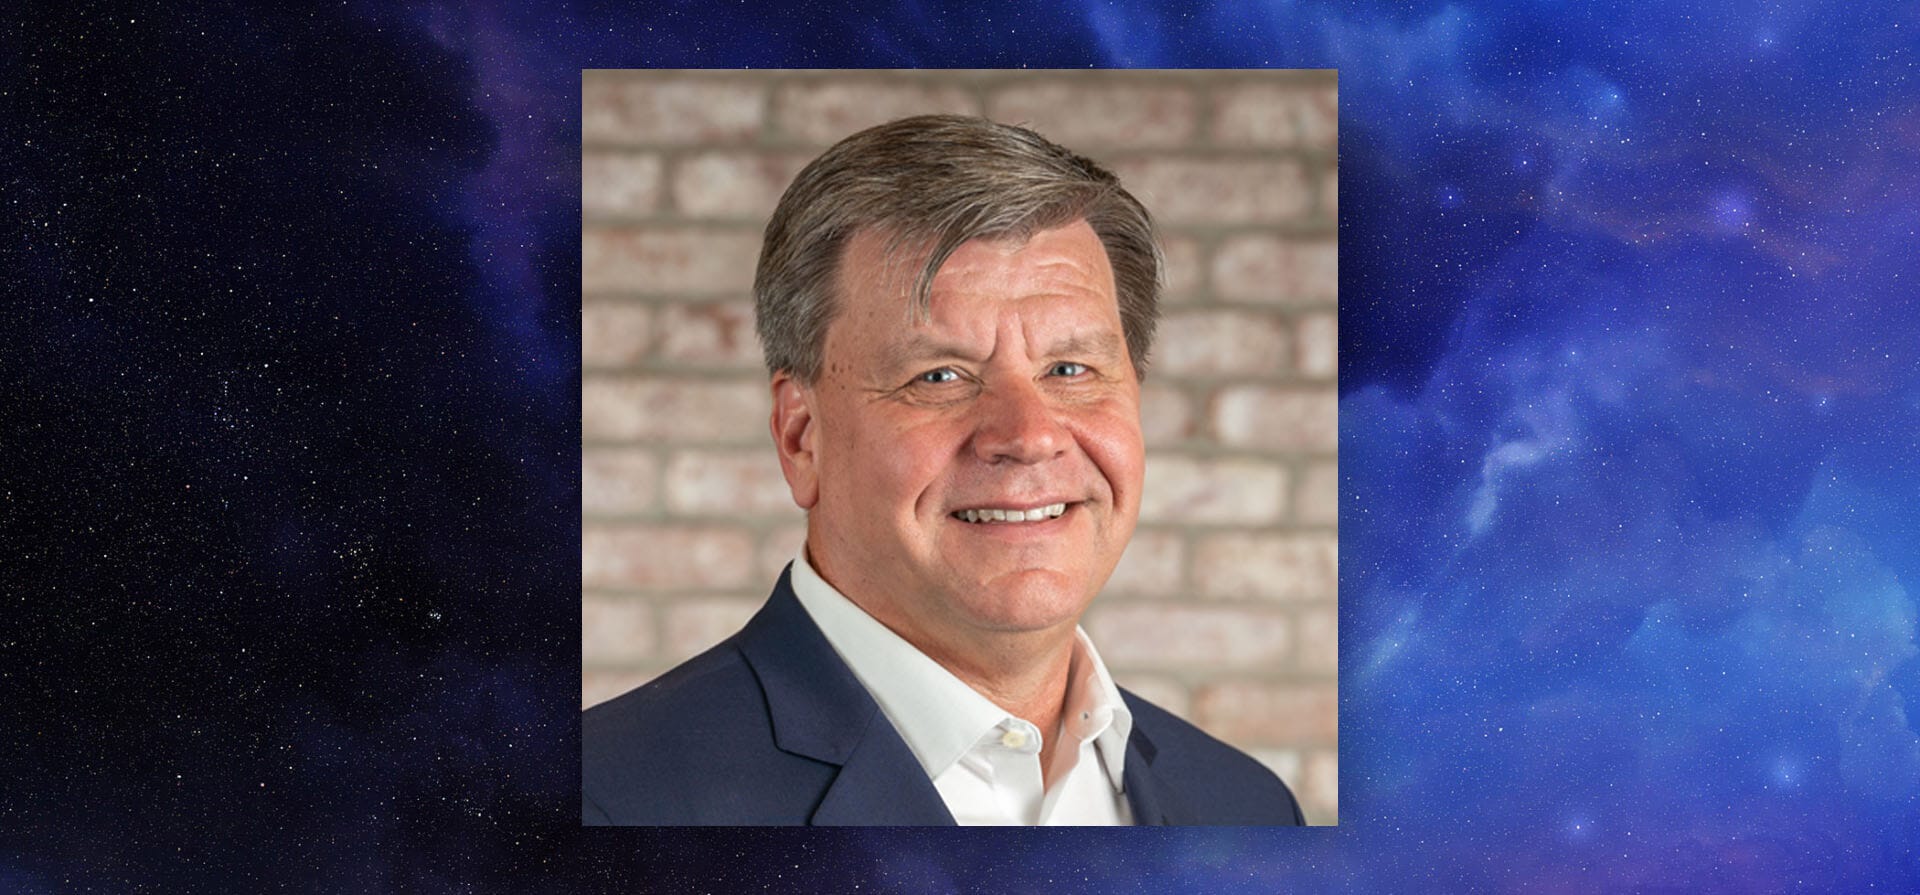 Hammerspace Appoints Industry Veteran John Harechmak to Lead Systems Engineering Teams and Drive Customer Success